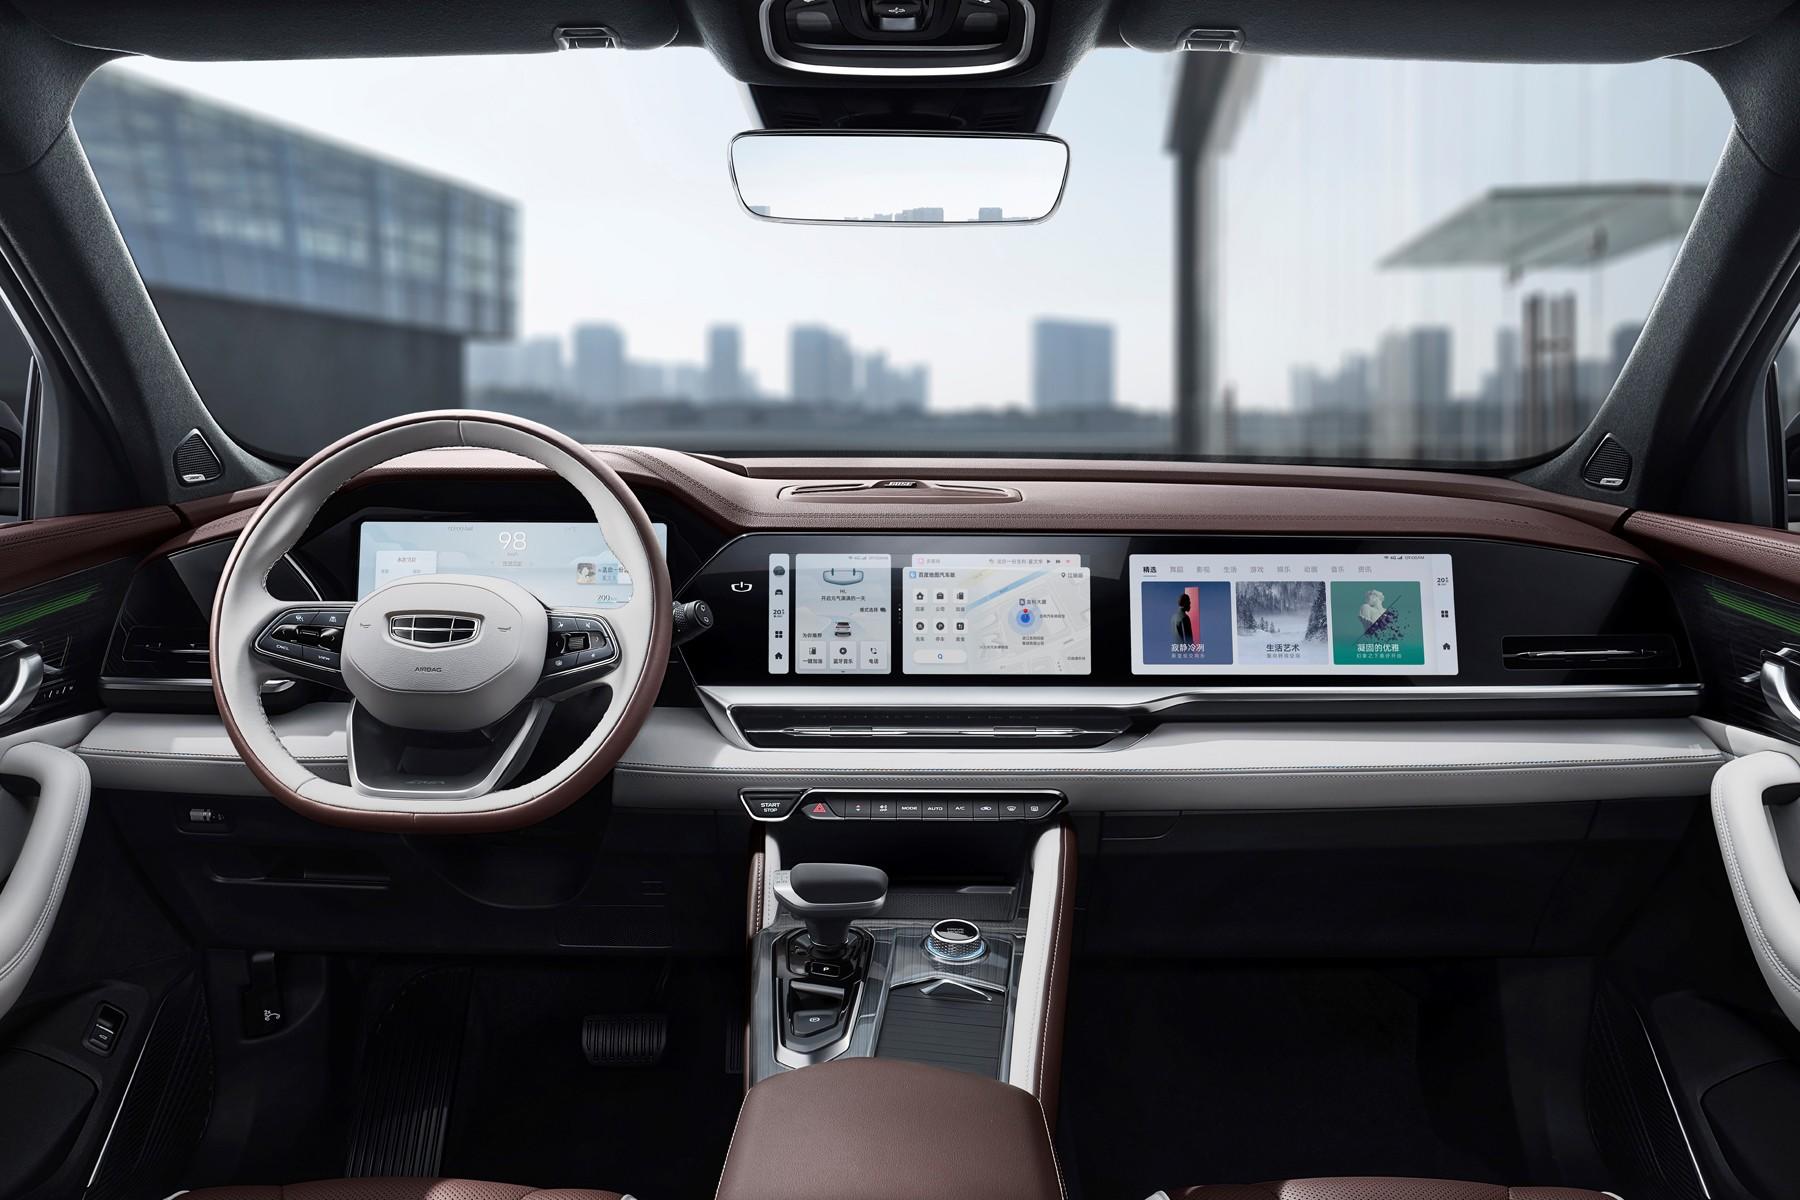 Cockpit solution developed by Visteon, ECARX and Qualcomm debuts in Geely Auto flagship SUV